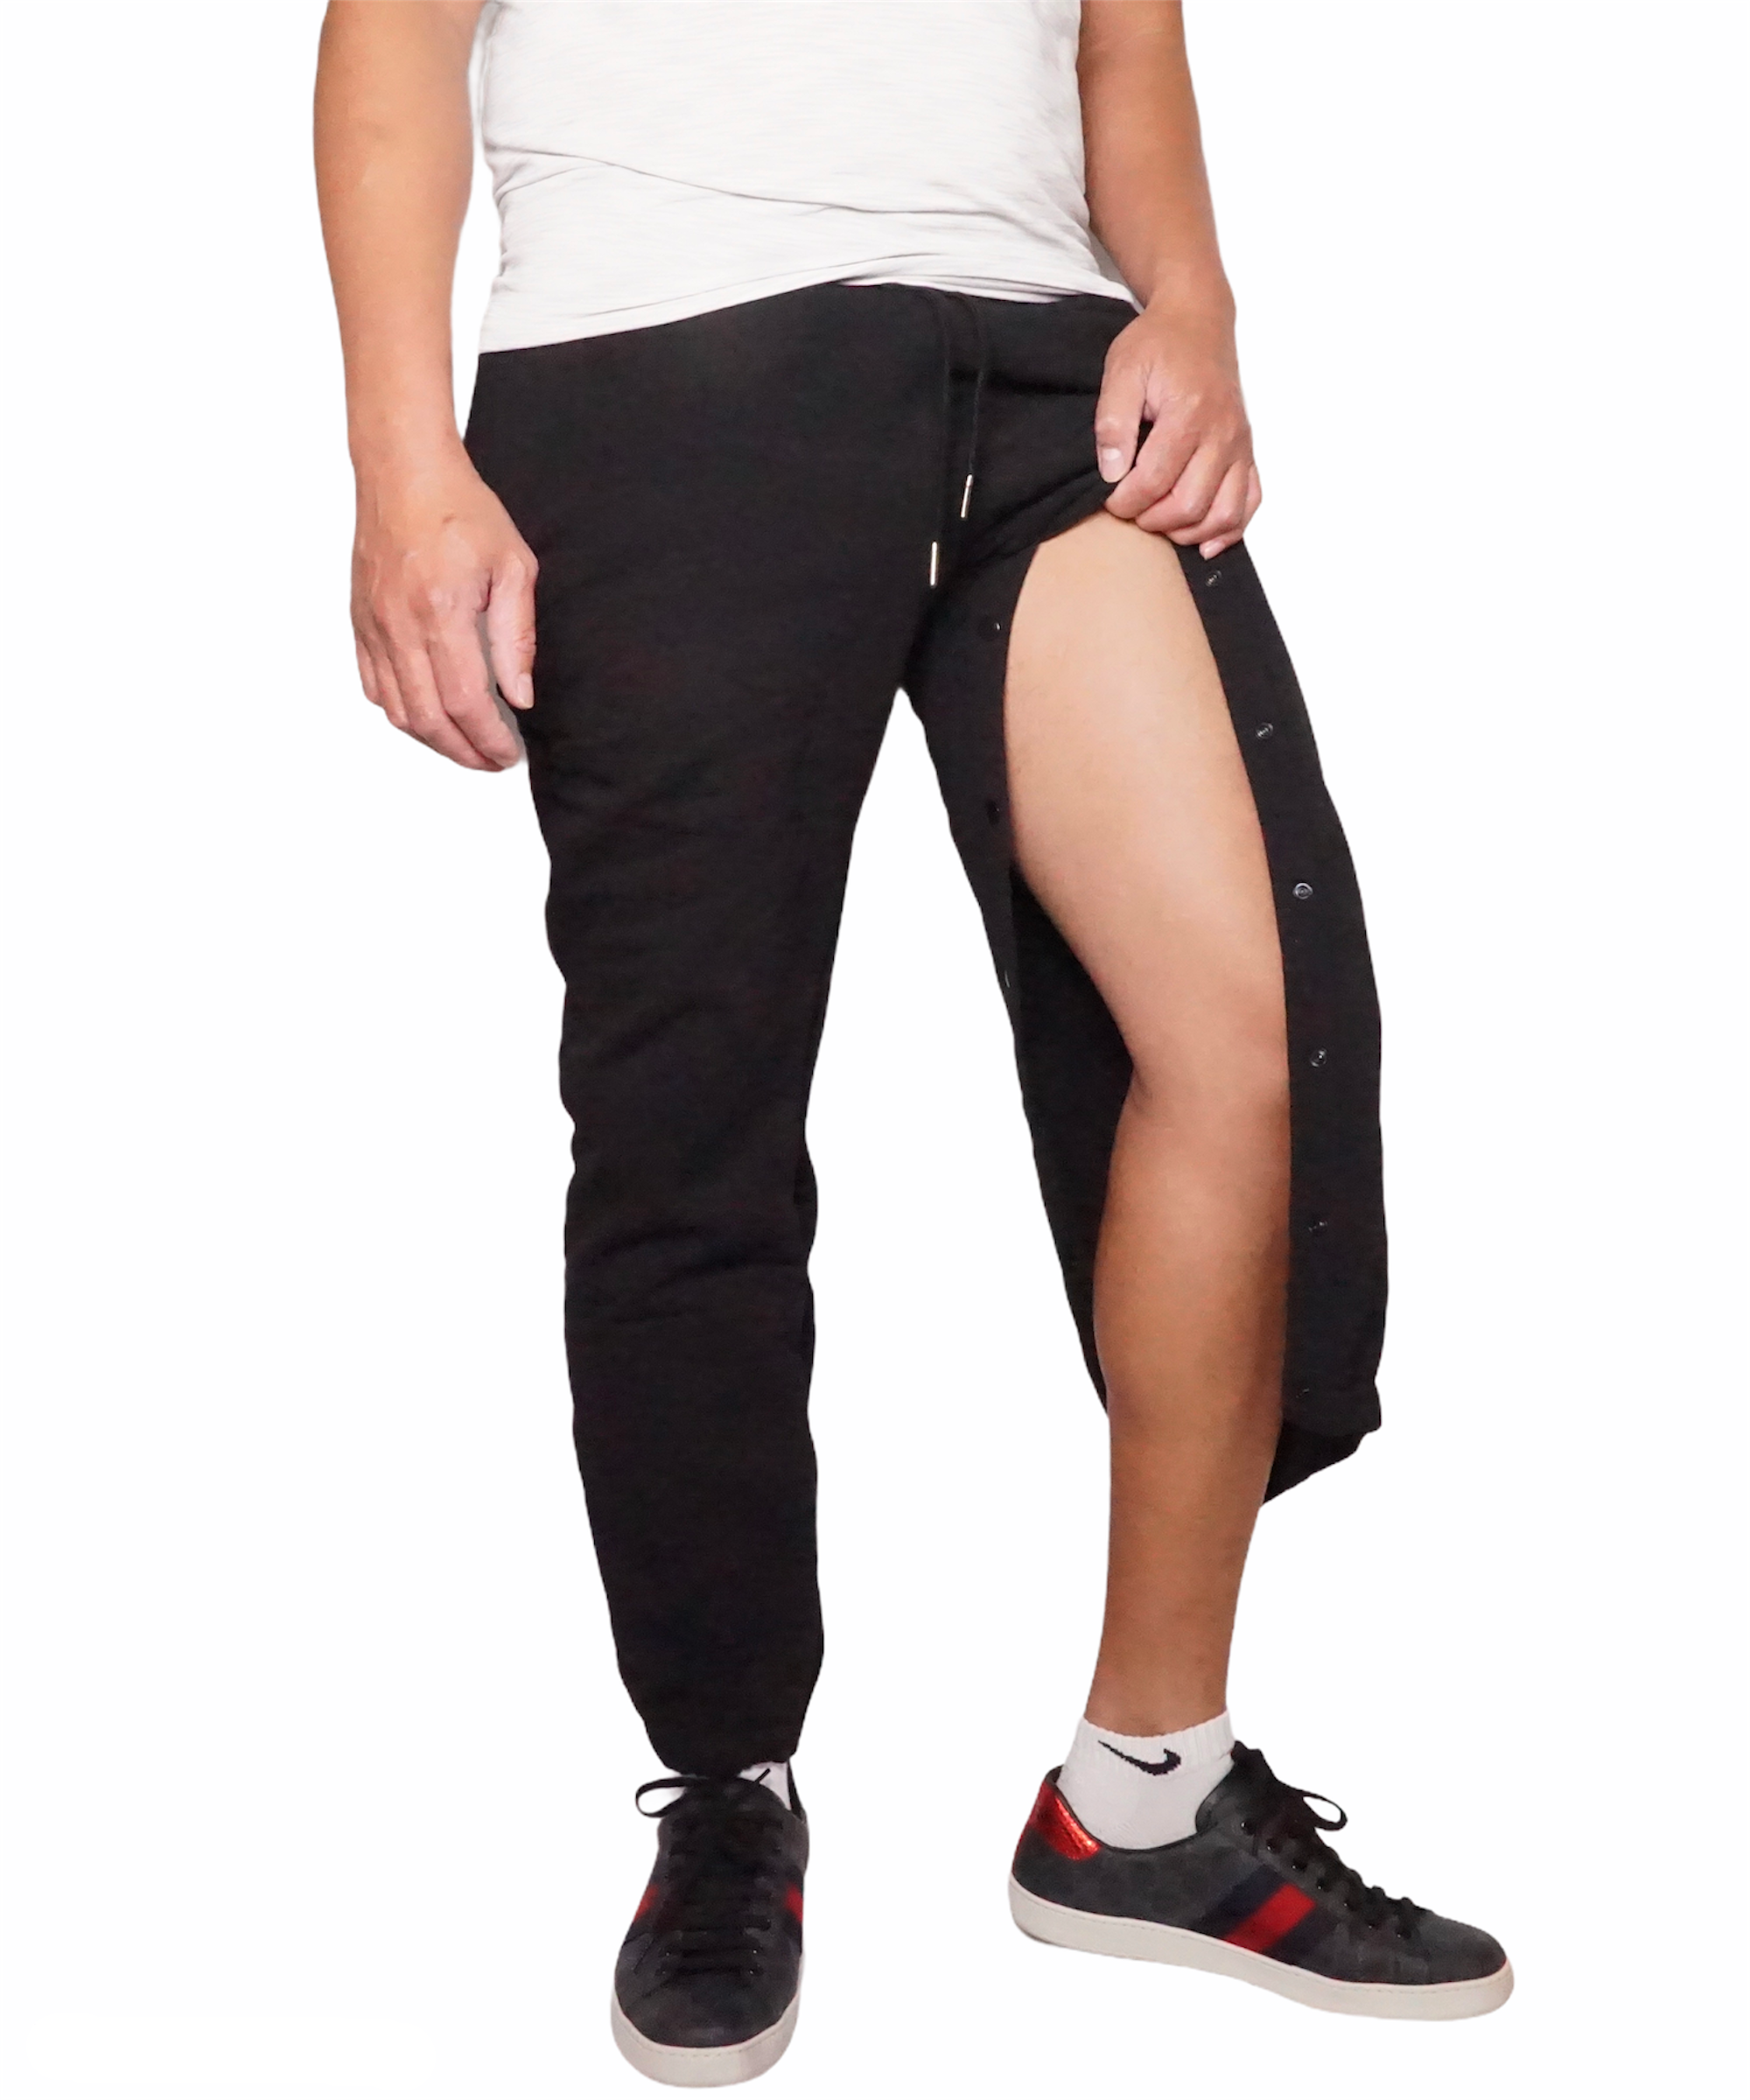 Buttons OpeningHemodialysis Sweatpants for Leg access AVF/Graft. For someone with Urinary catheter bag.